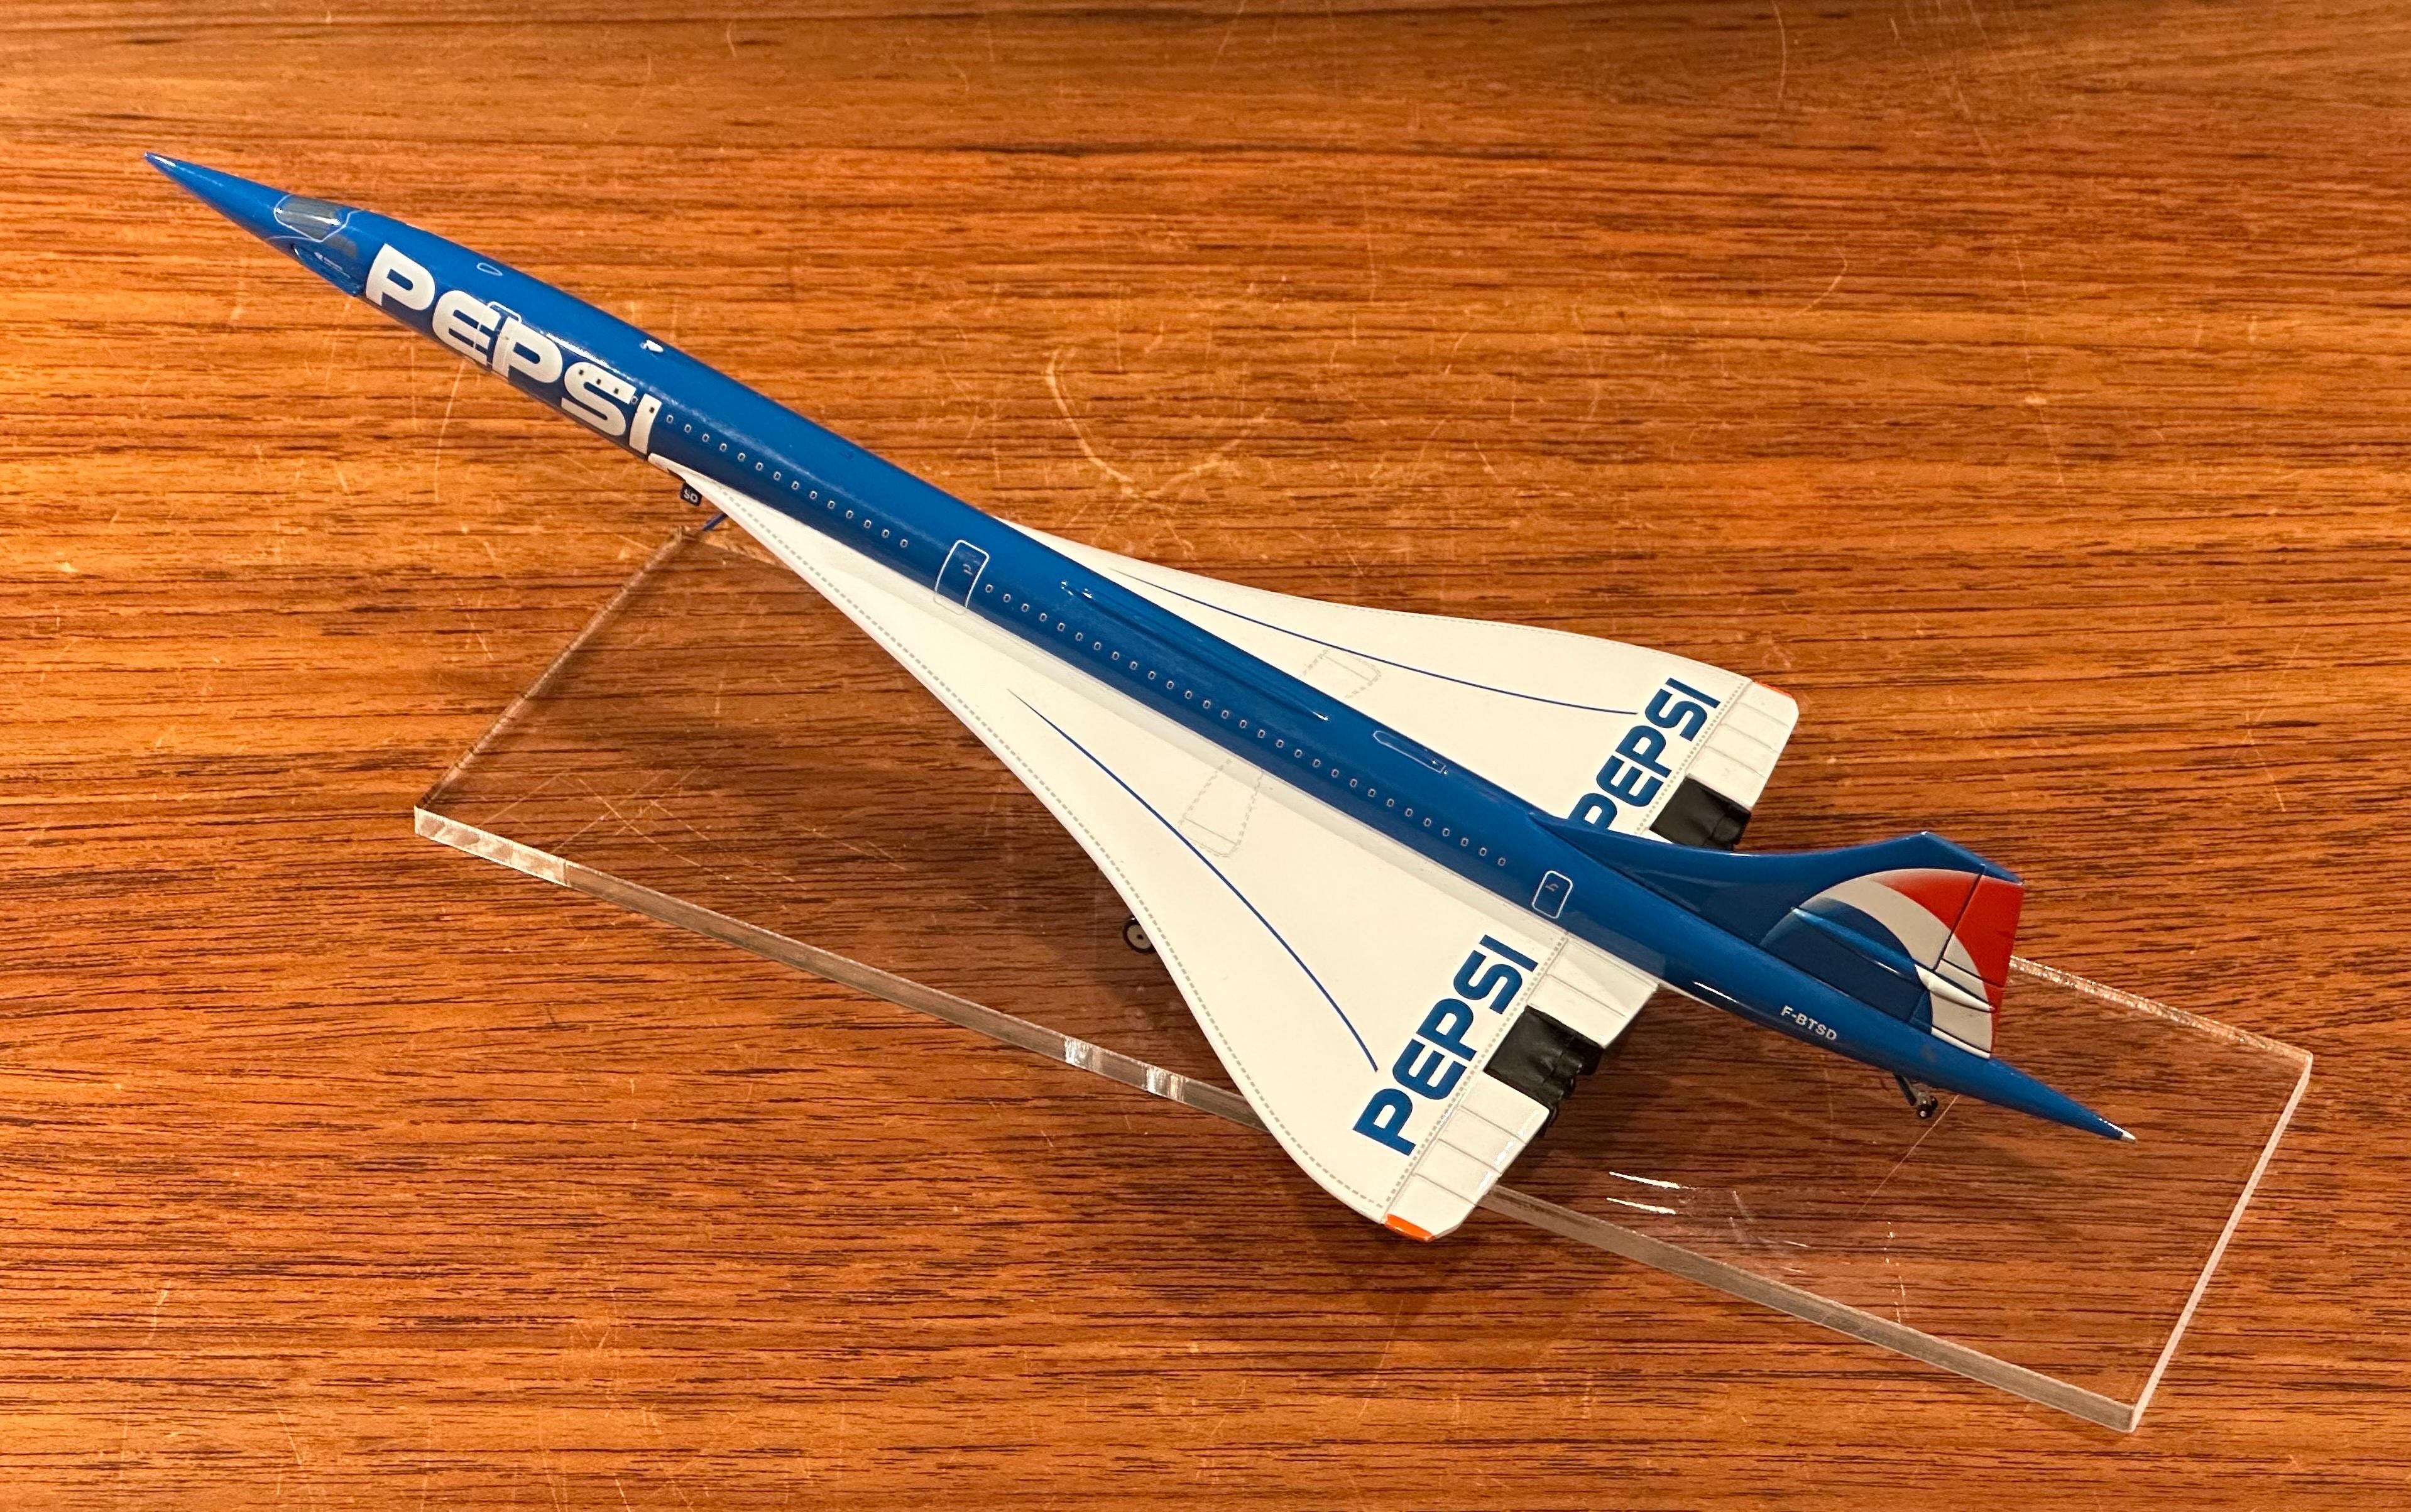 A very cool Pepsi logoed Concorde jetliner desk model on lucite base, circa late 1990s.  The model measures 5.5